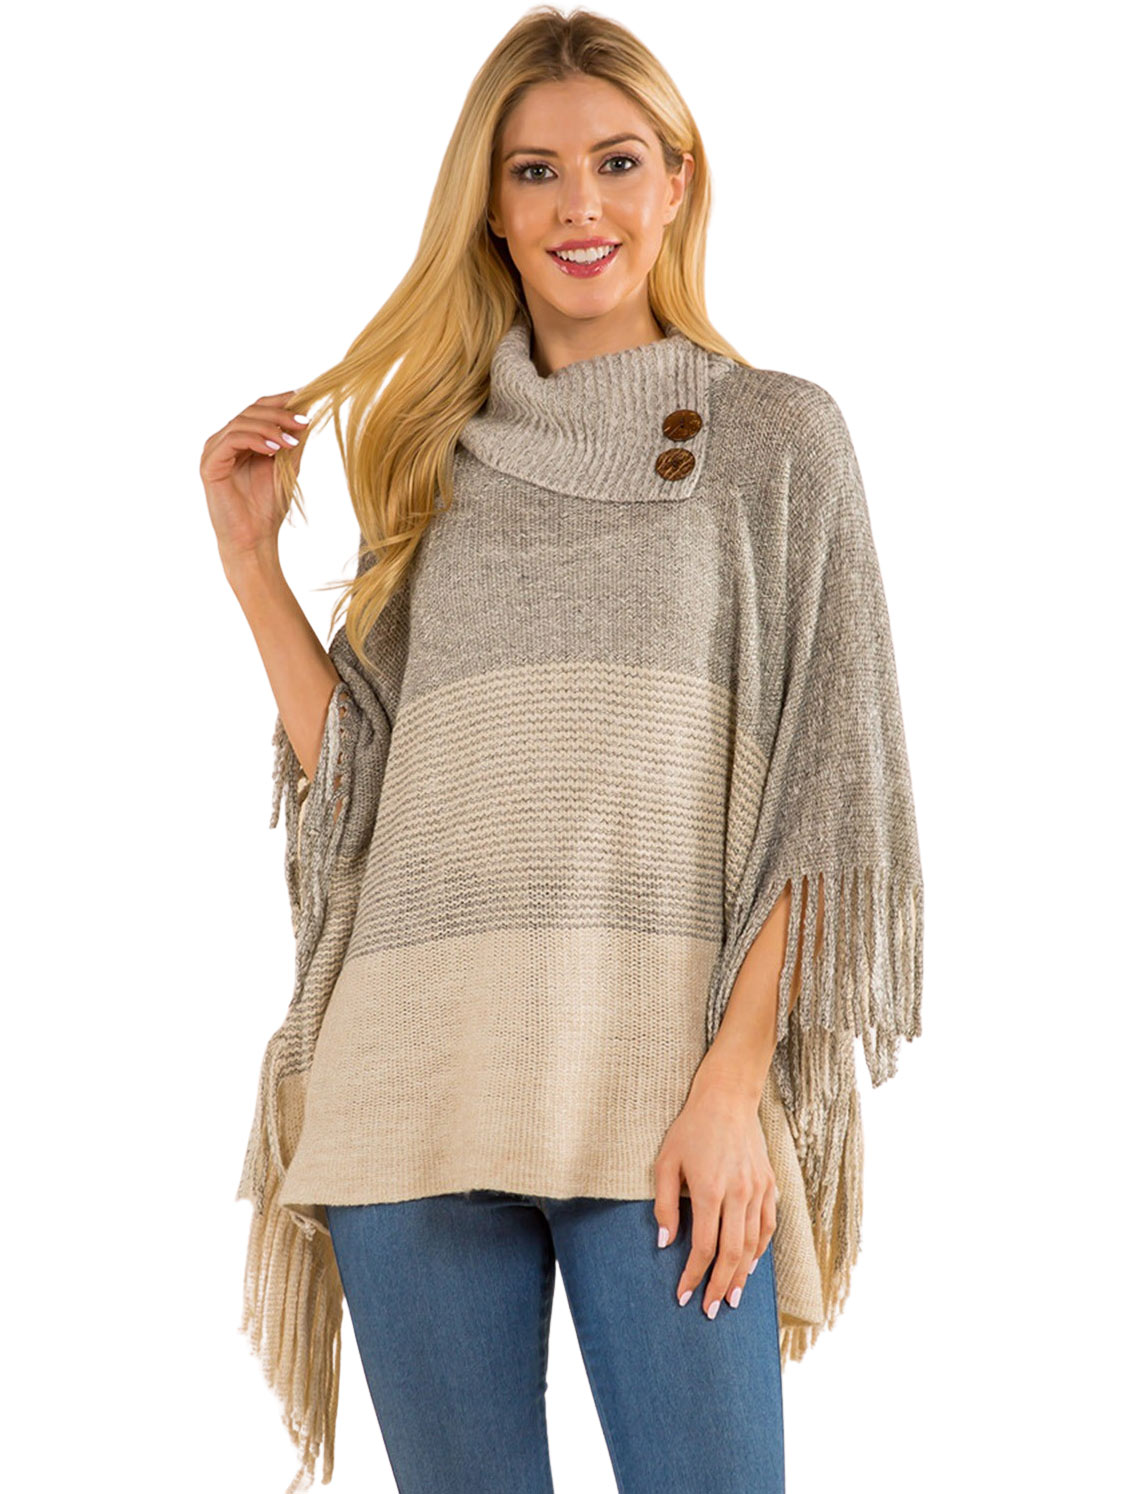 wholesale 4209 - Poncho - Ombre Cowl-neck w/ Wooden Buttons